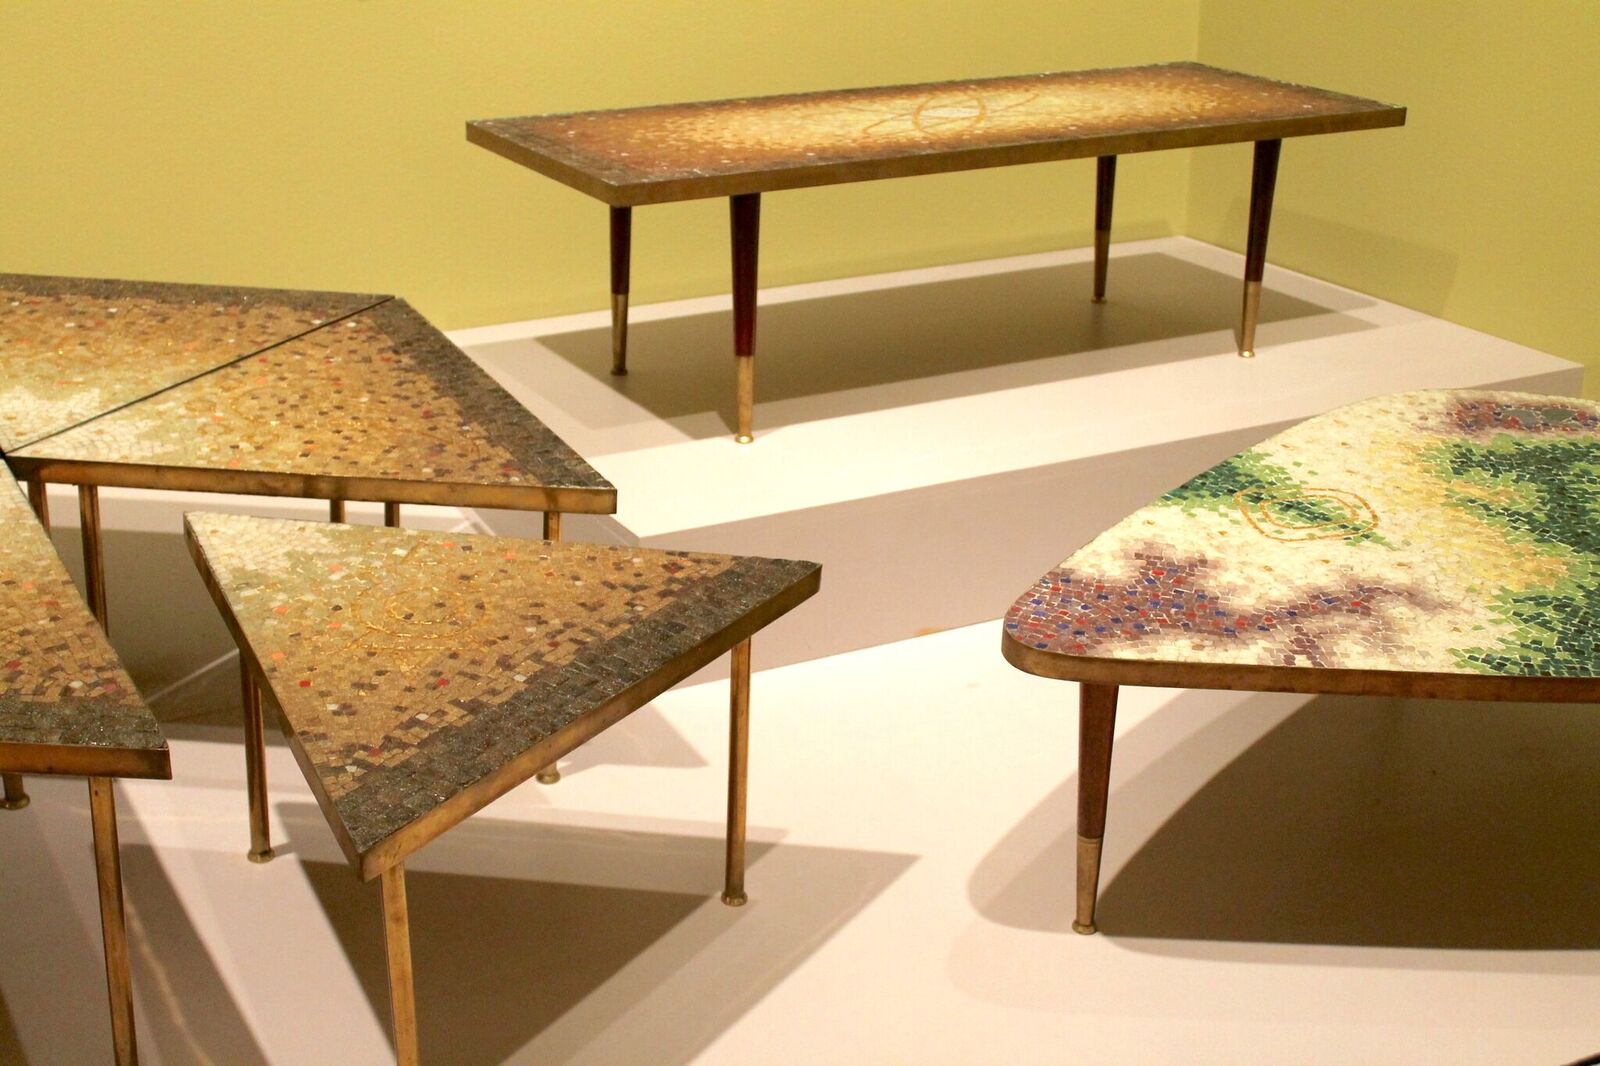 Mosaic tables by Genaro Álvarez . The table furthest back is long and has brown and gold tiles. Another table is a hexagon made up of smaller wedge shaped tables. And the table in the foreground is a triangular shape with rounded corners and red, purple, and green tiles. Image by Melissa Patiño Cervantes.